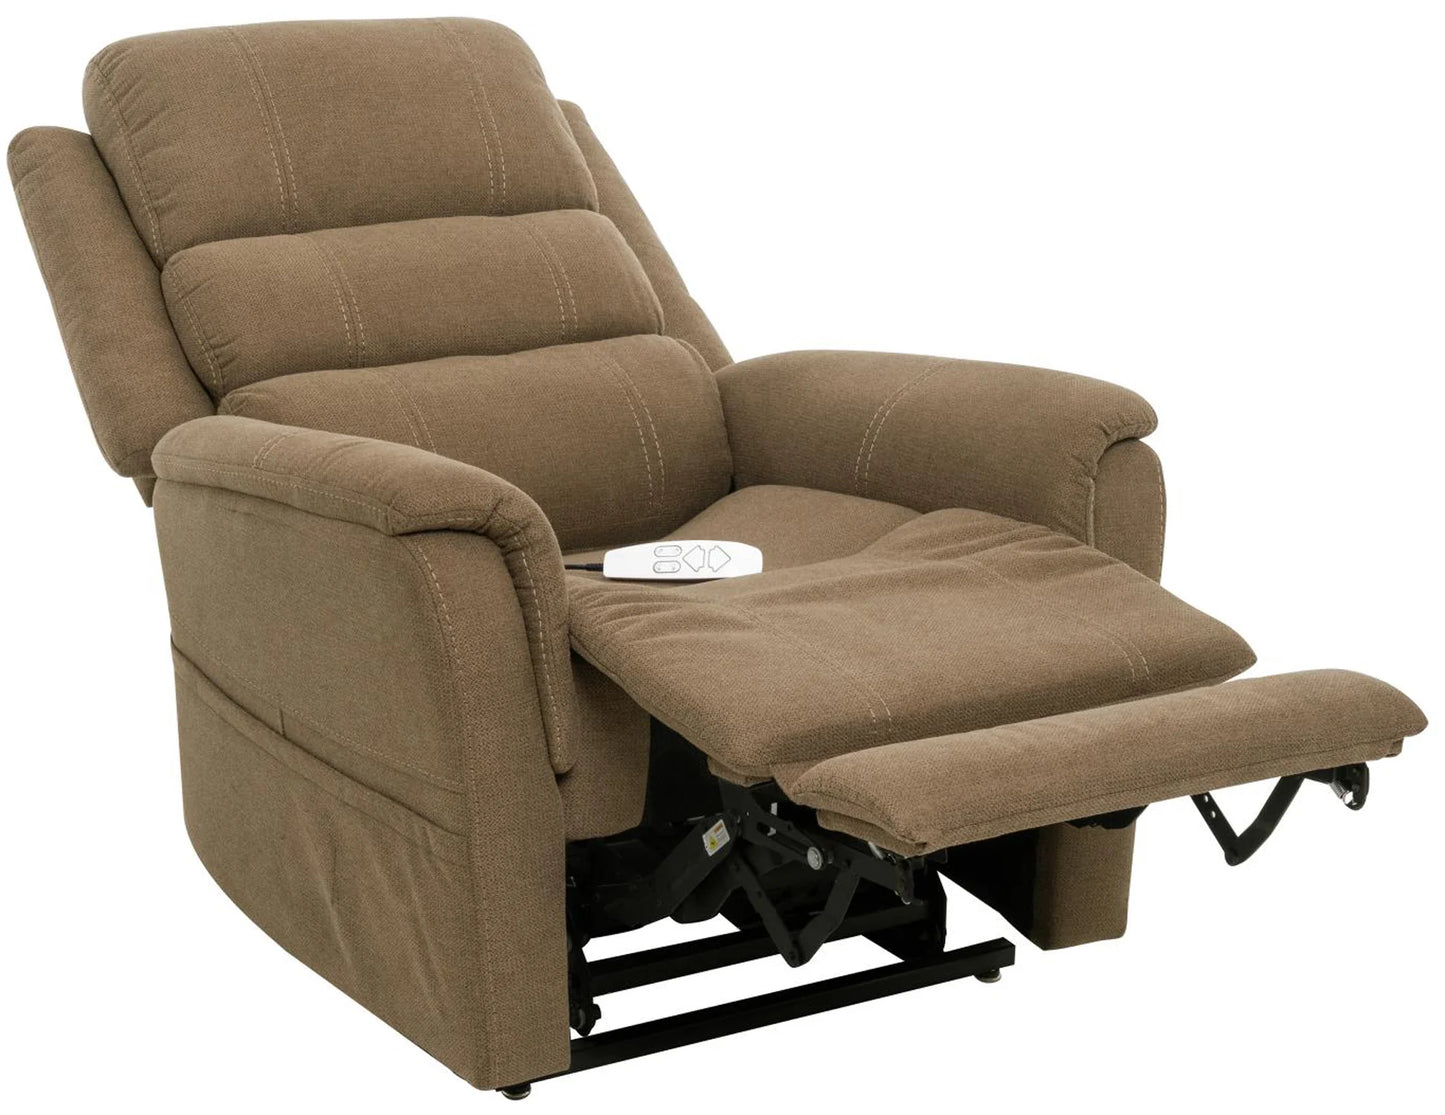 MM-3603 Lay-Flat Chaise Lounger